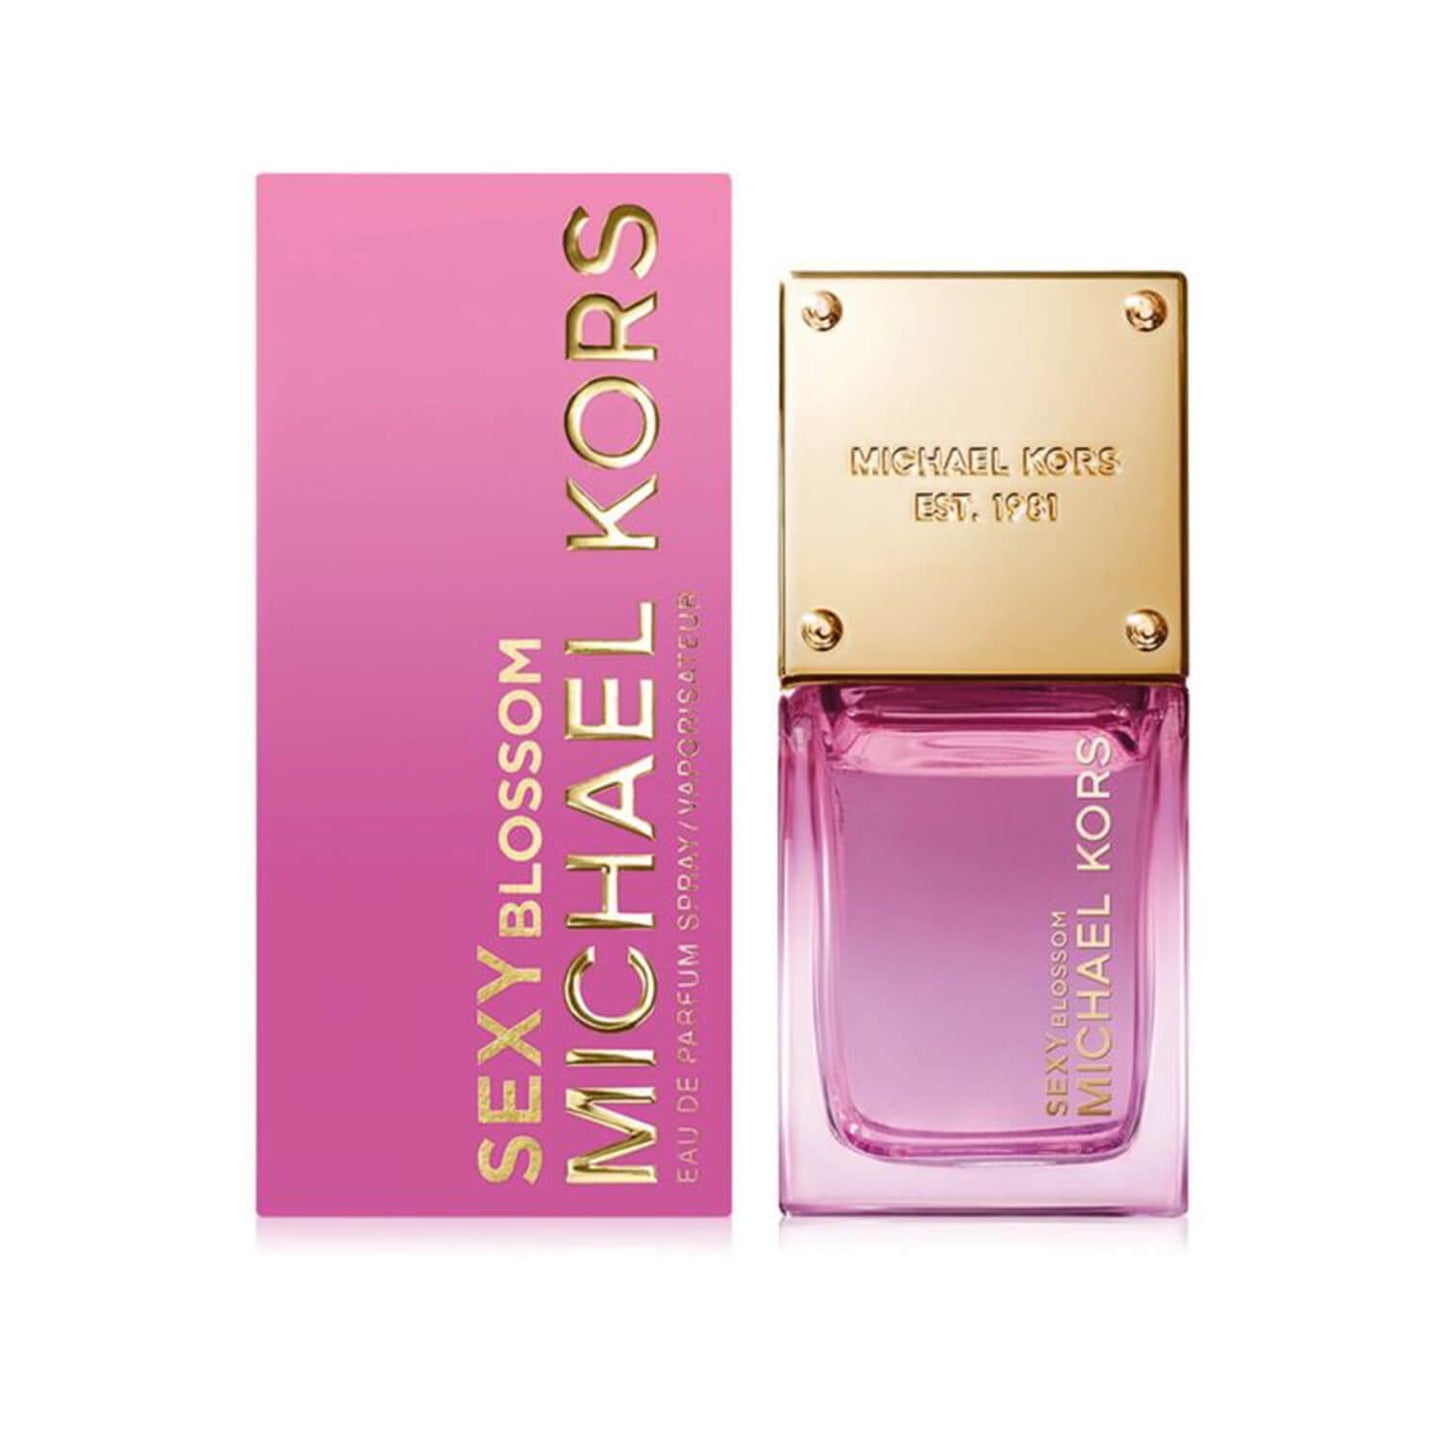 buy michael kors sexy blossom perfume for women available at heygirl.pk for delivery in Pakistan